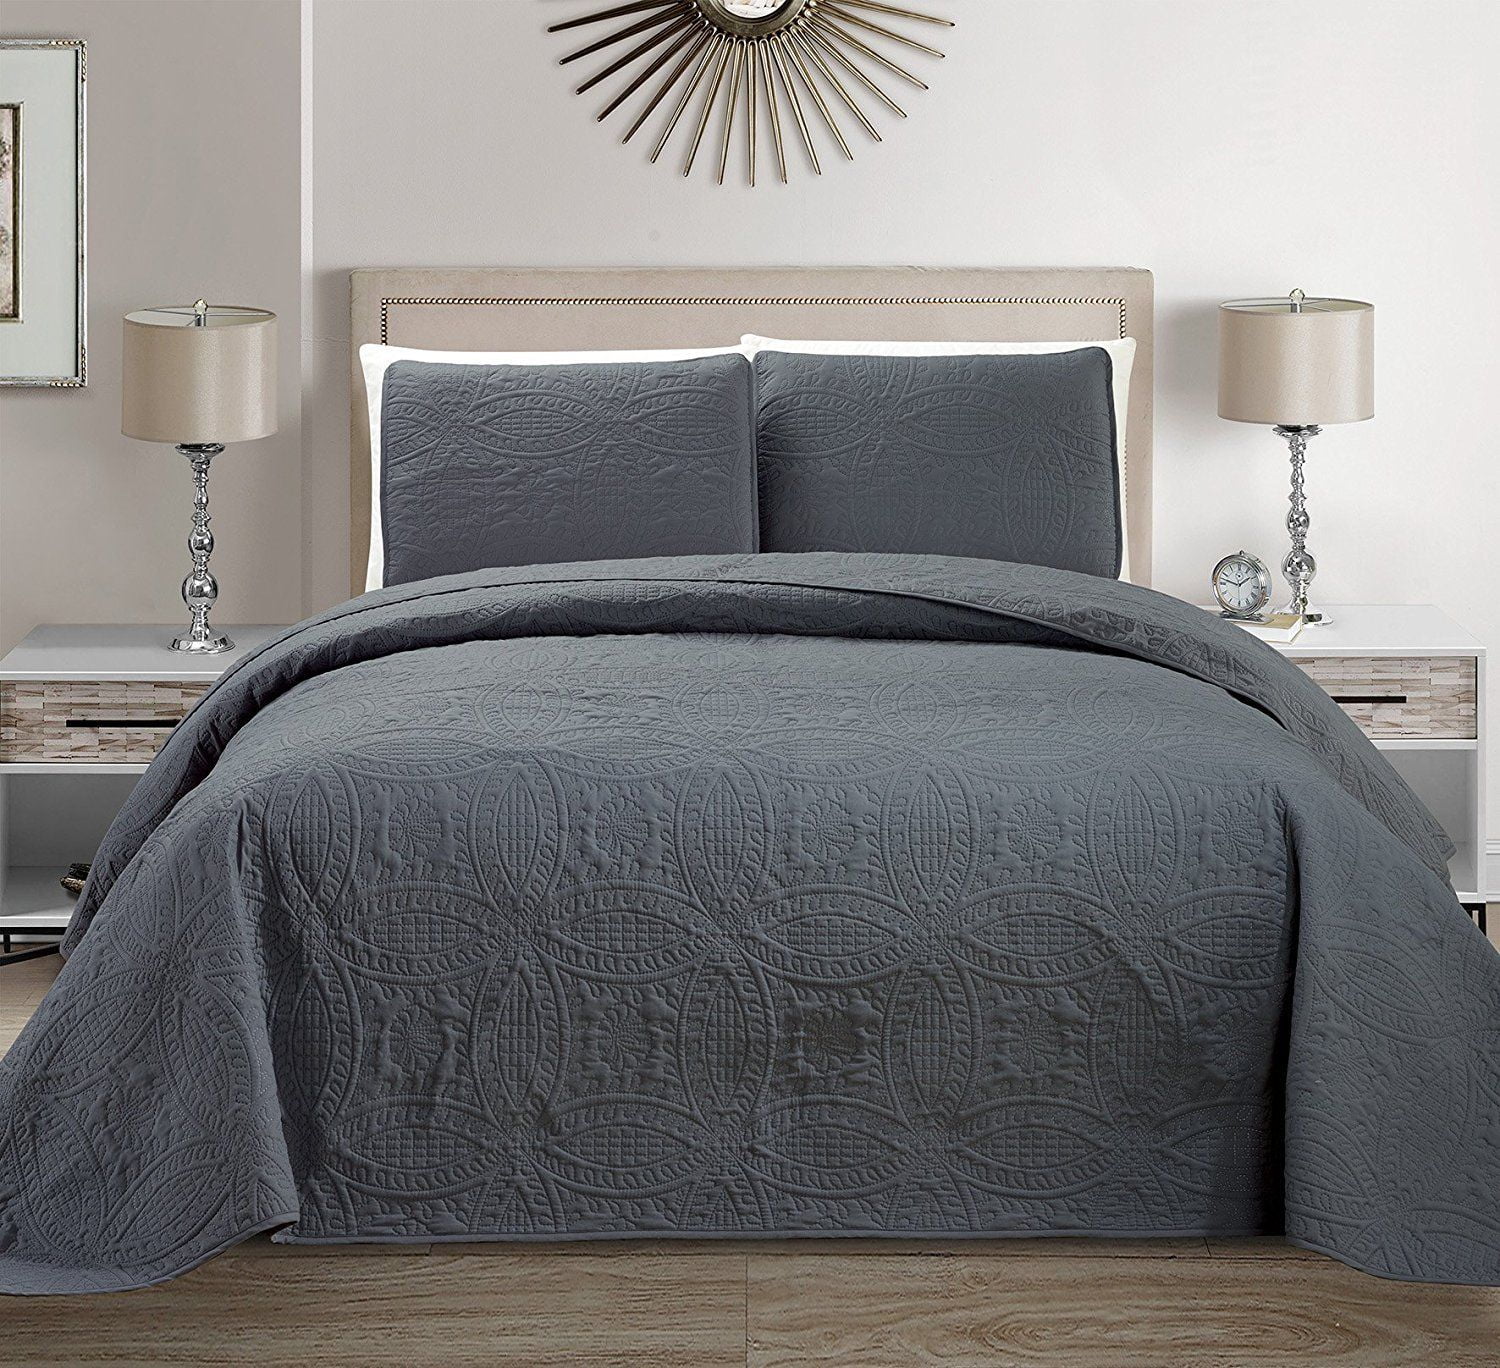 Details about   Home Collection 3Pc King/Cal King Over Size Luxury Embossed Bedspread Set Light 